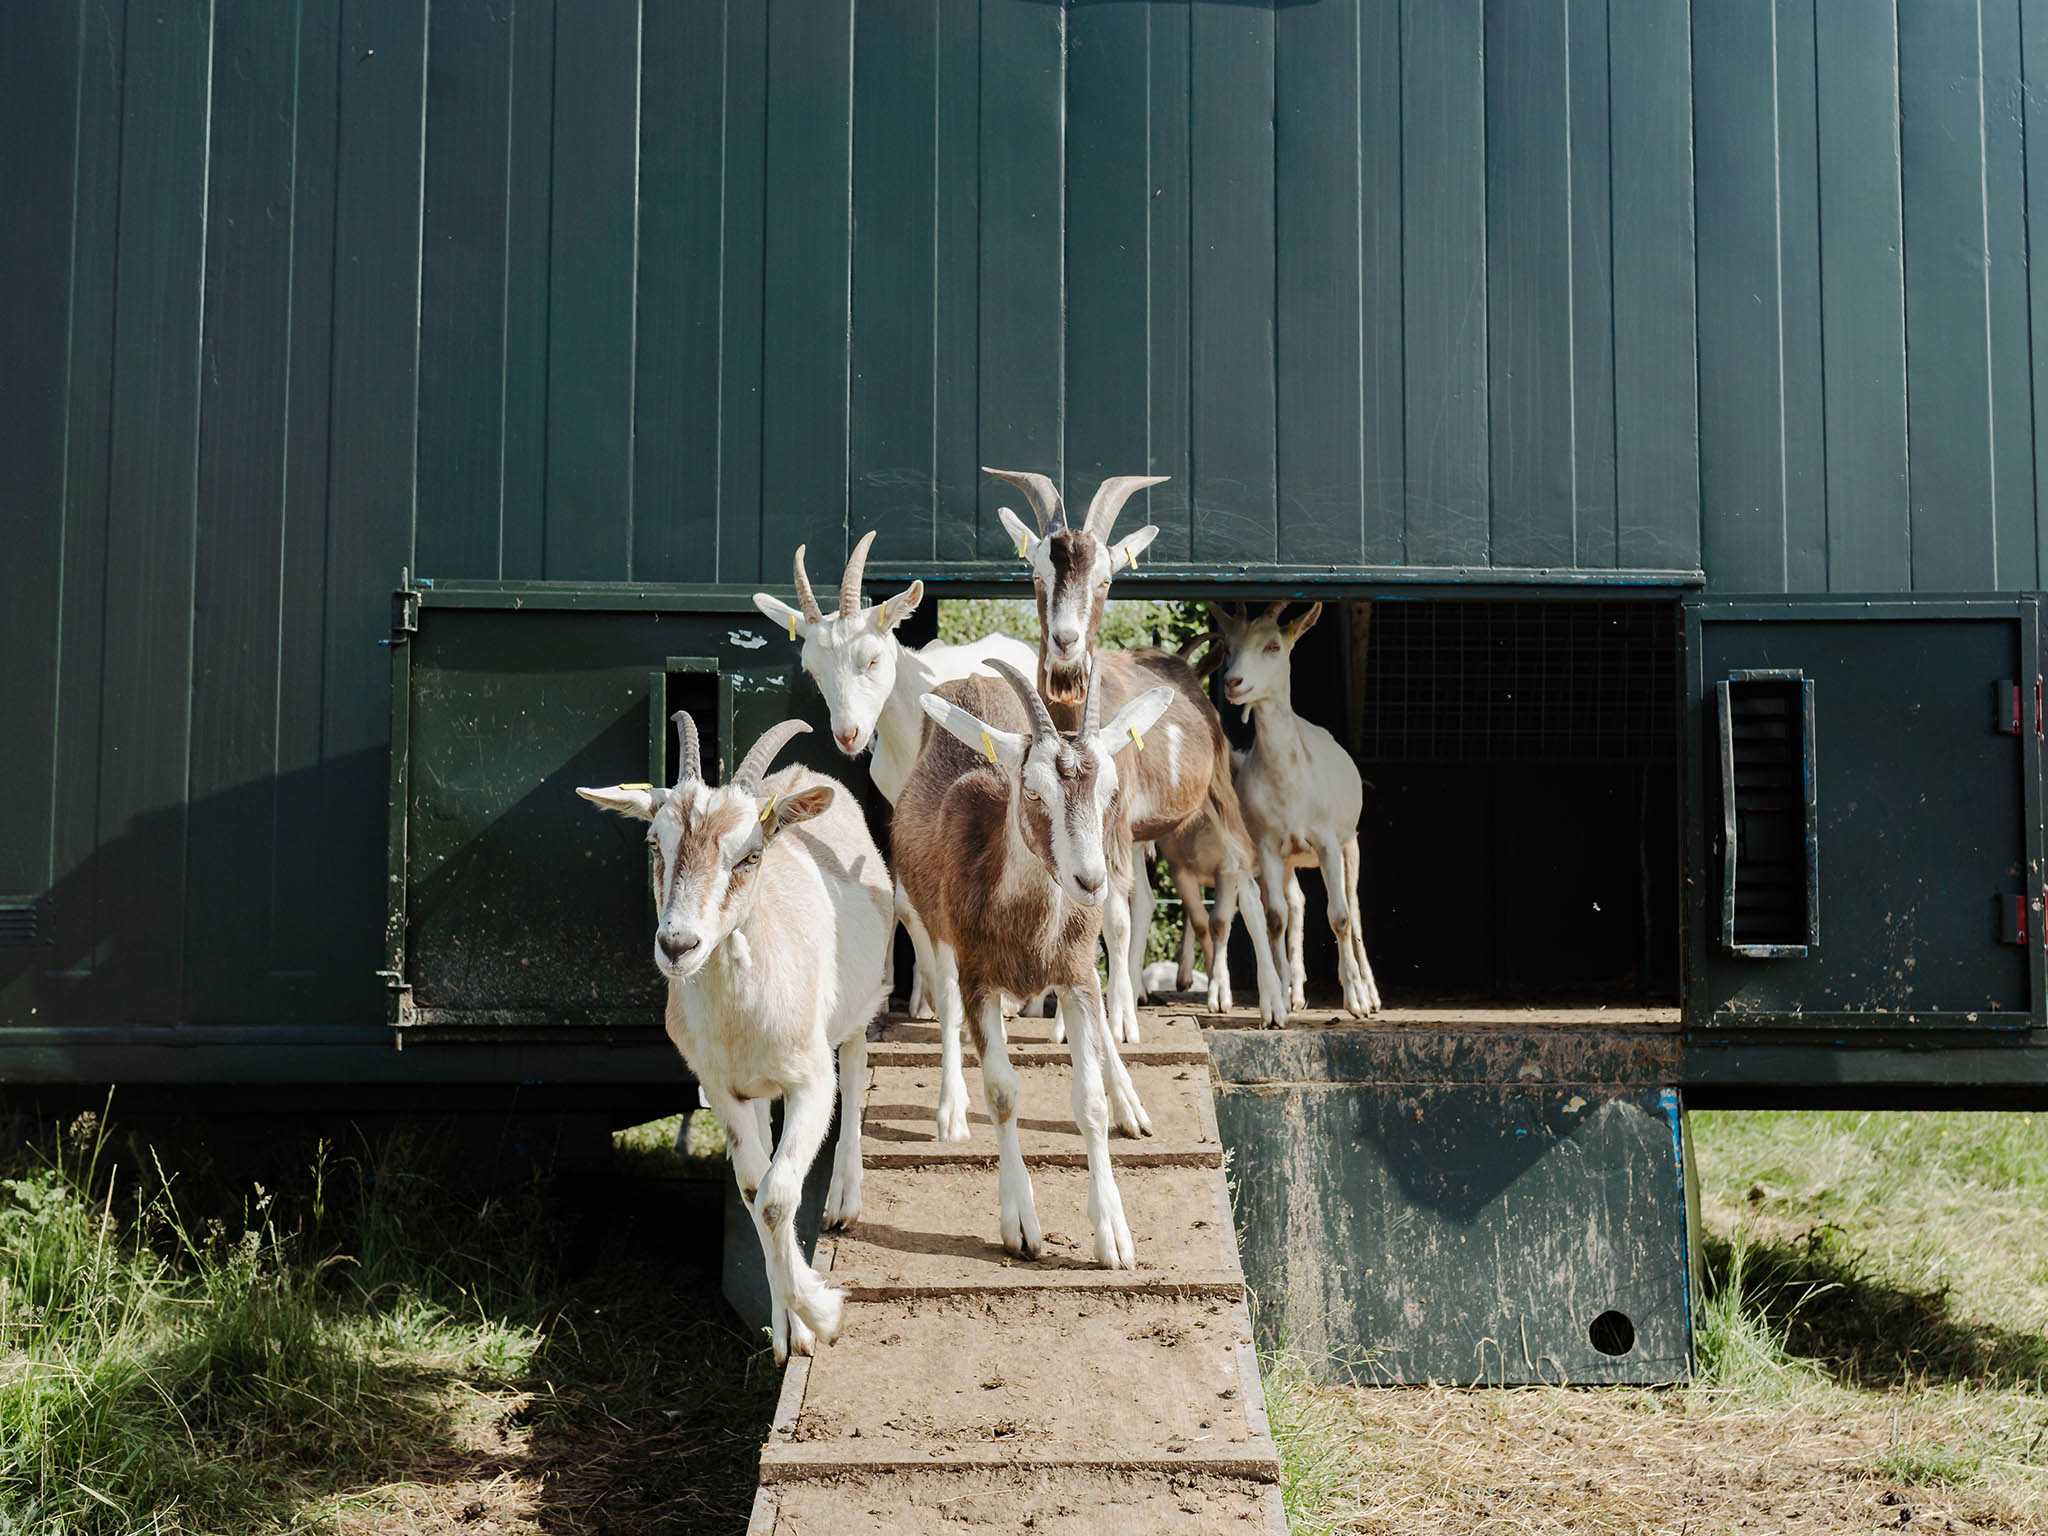 Goats reared for meat have the option to go outside or stay inside at Long Meadow Goats farm